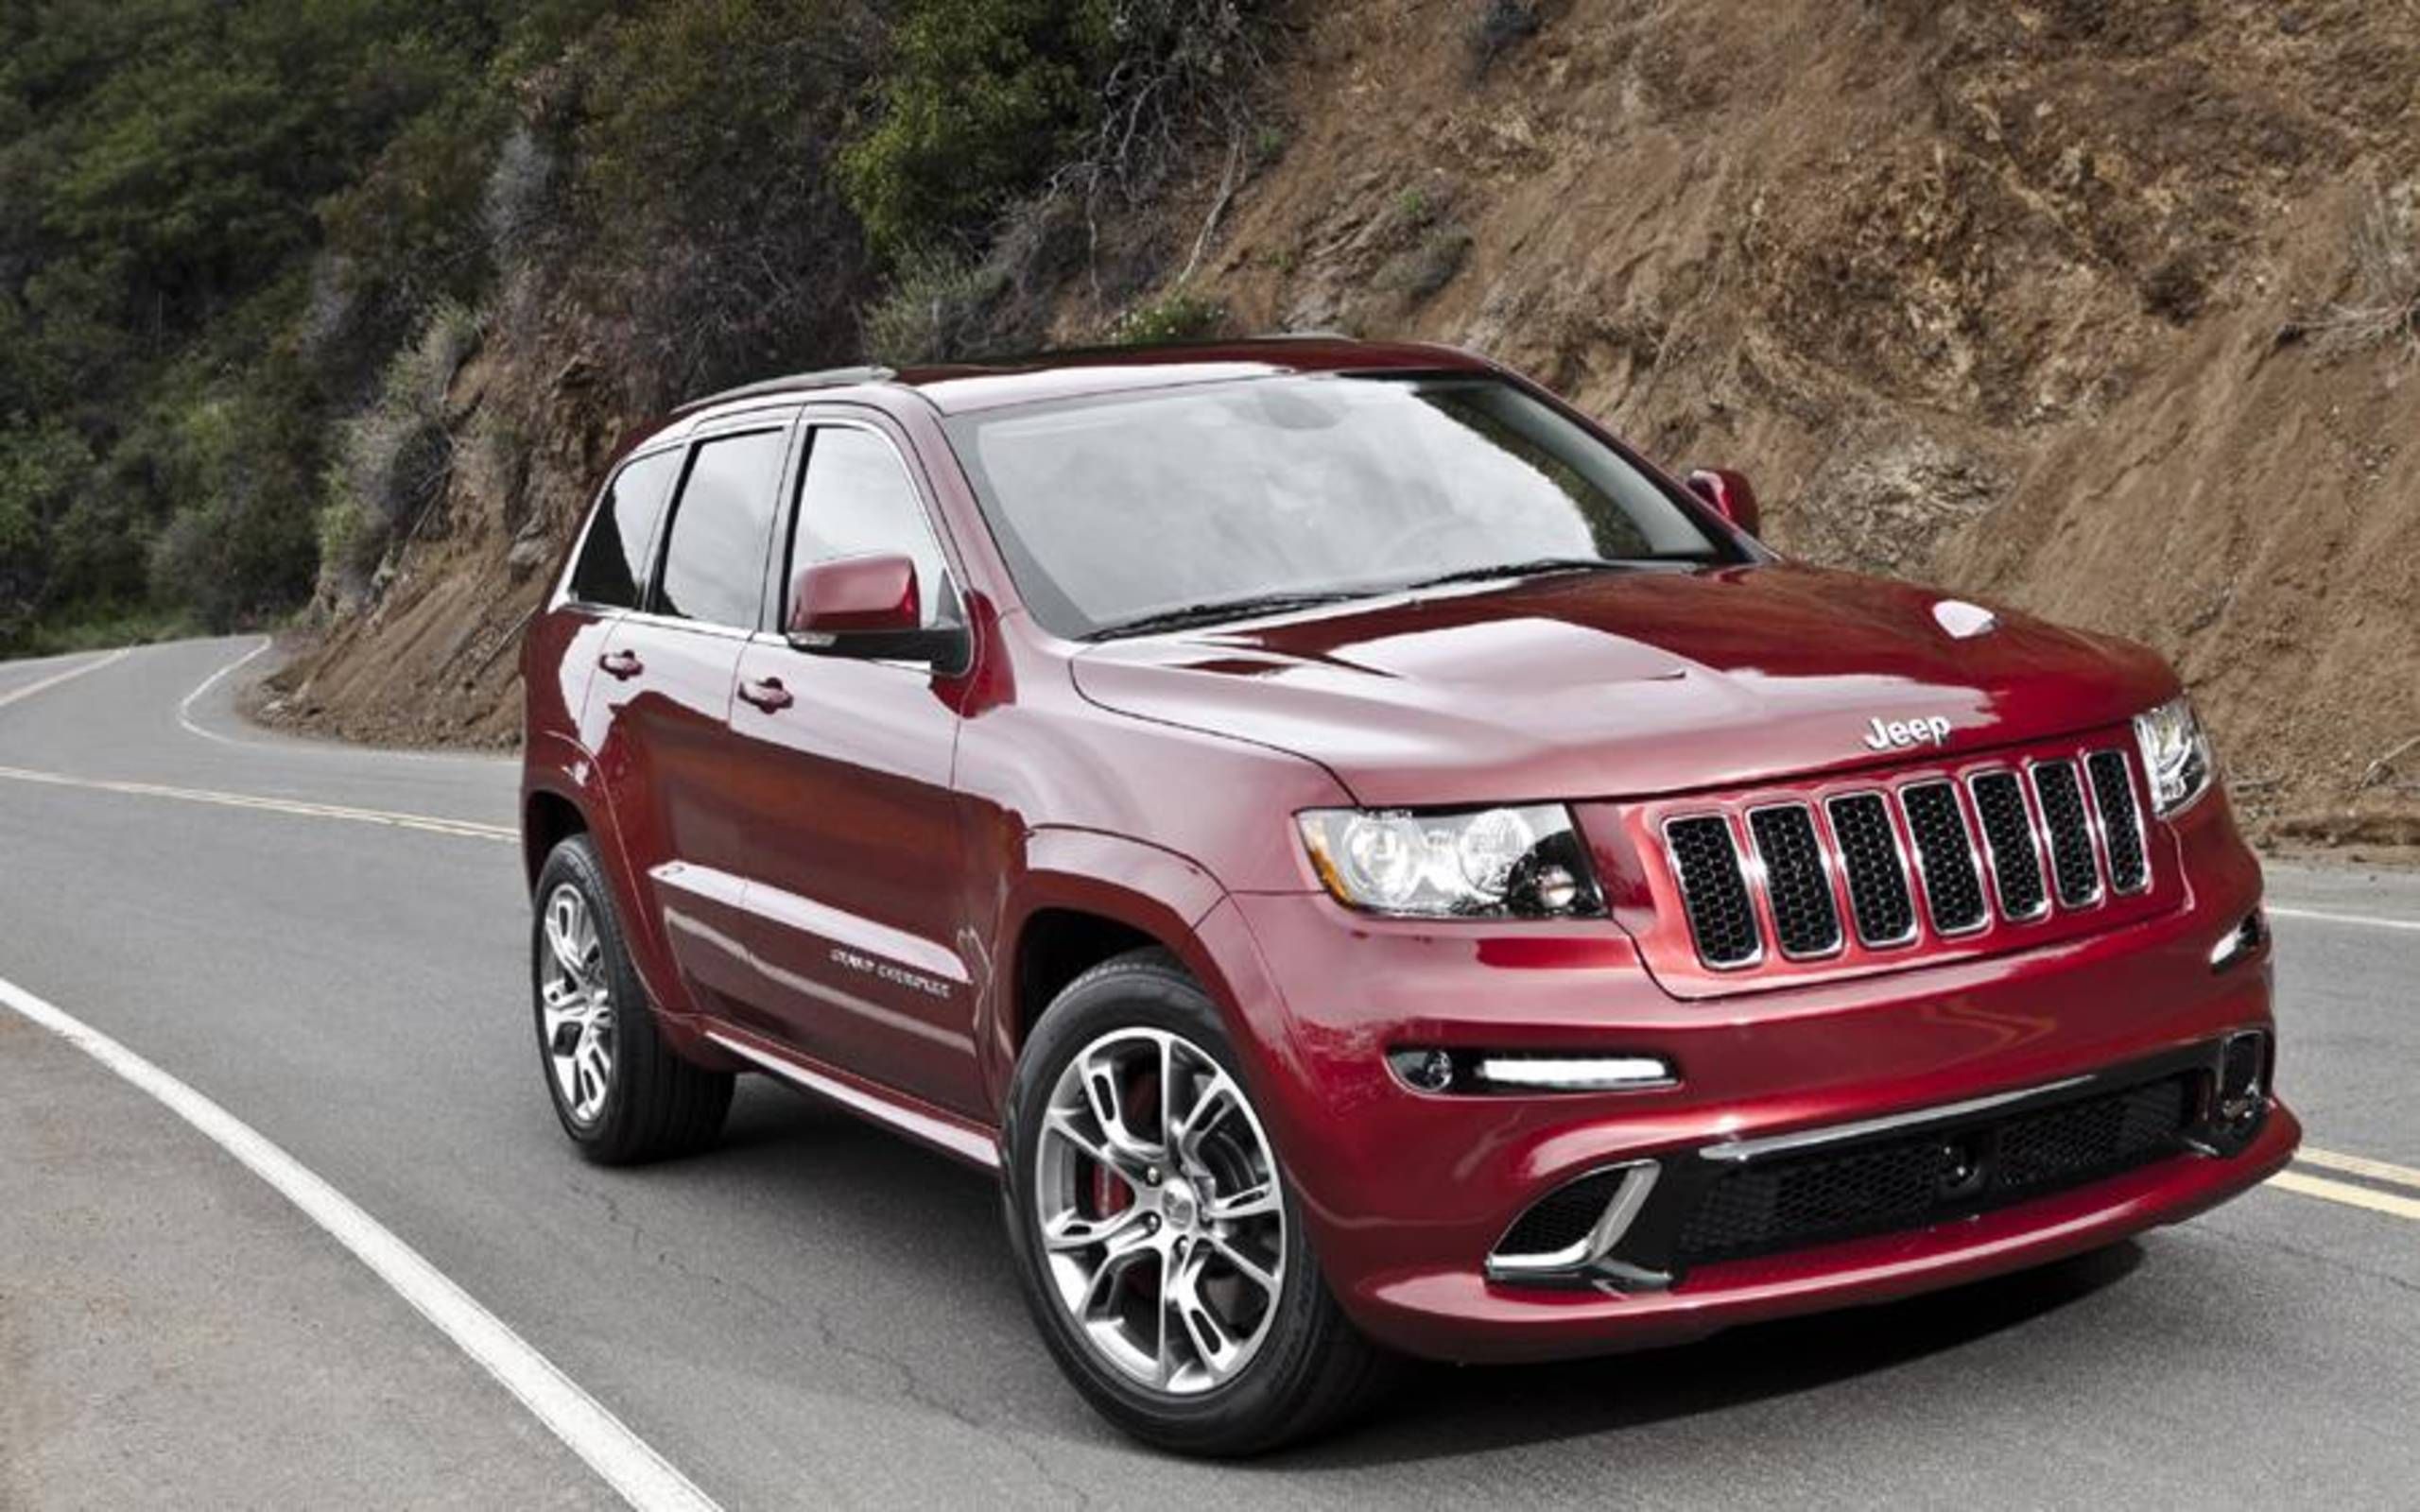 Invitación Nylon As 2013 Jeep Grand Cherokee SRT8 review notes: We don't care if it doesn't  make a lot of sense